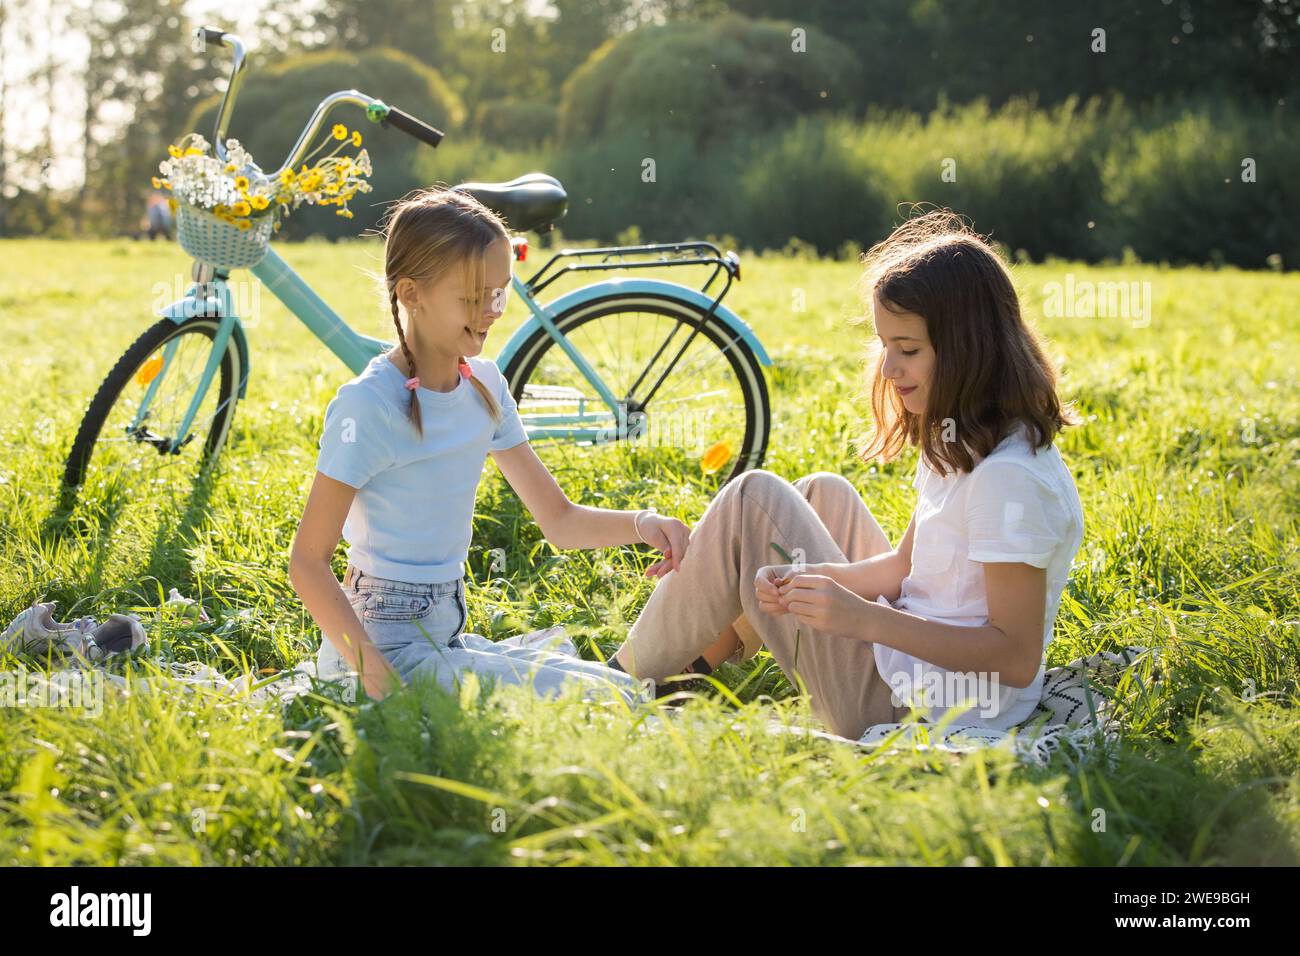 Two girls enjoy summer and vacations together spending time on green grass lawn in park, Stock Photo